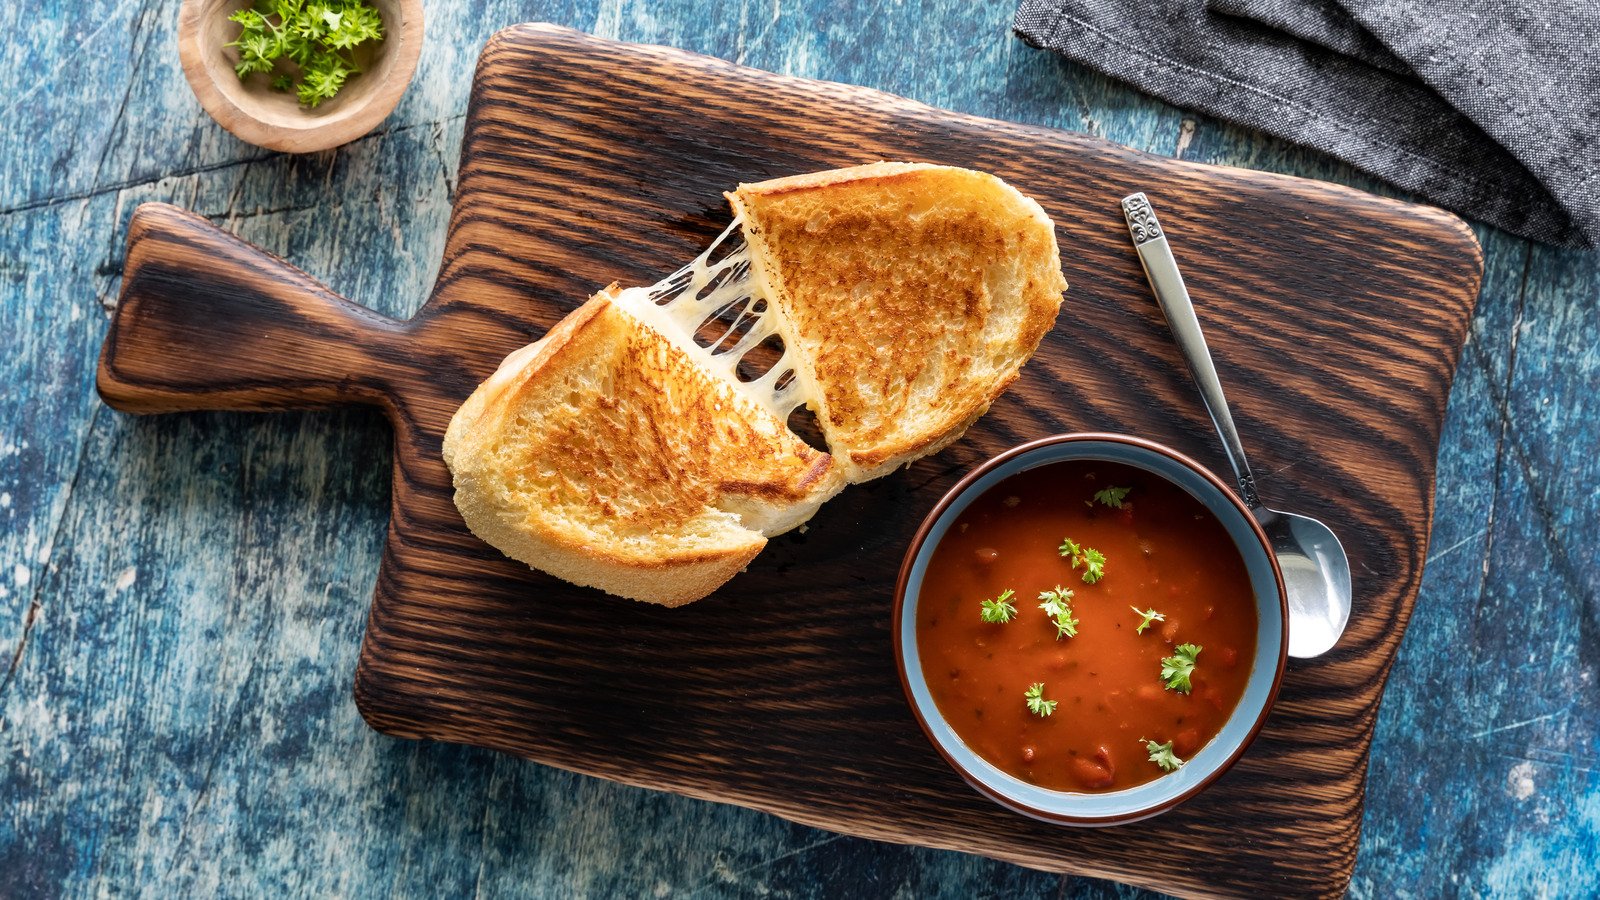 13 Common Mistakes Everyone Makes With Grilled Cheese